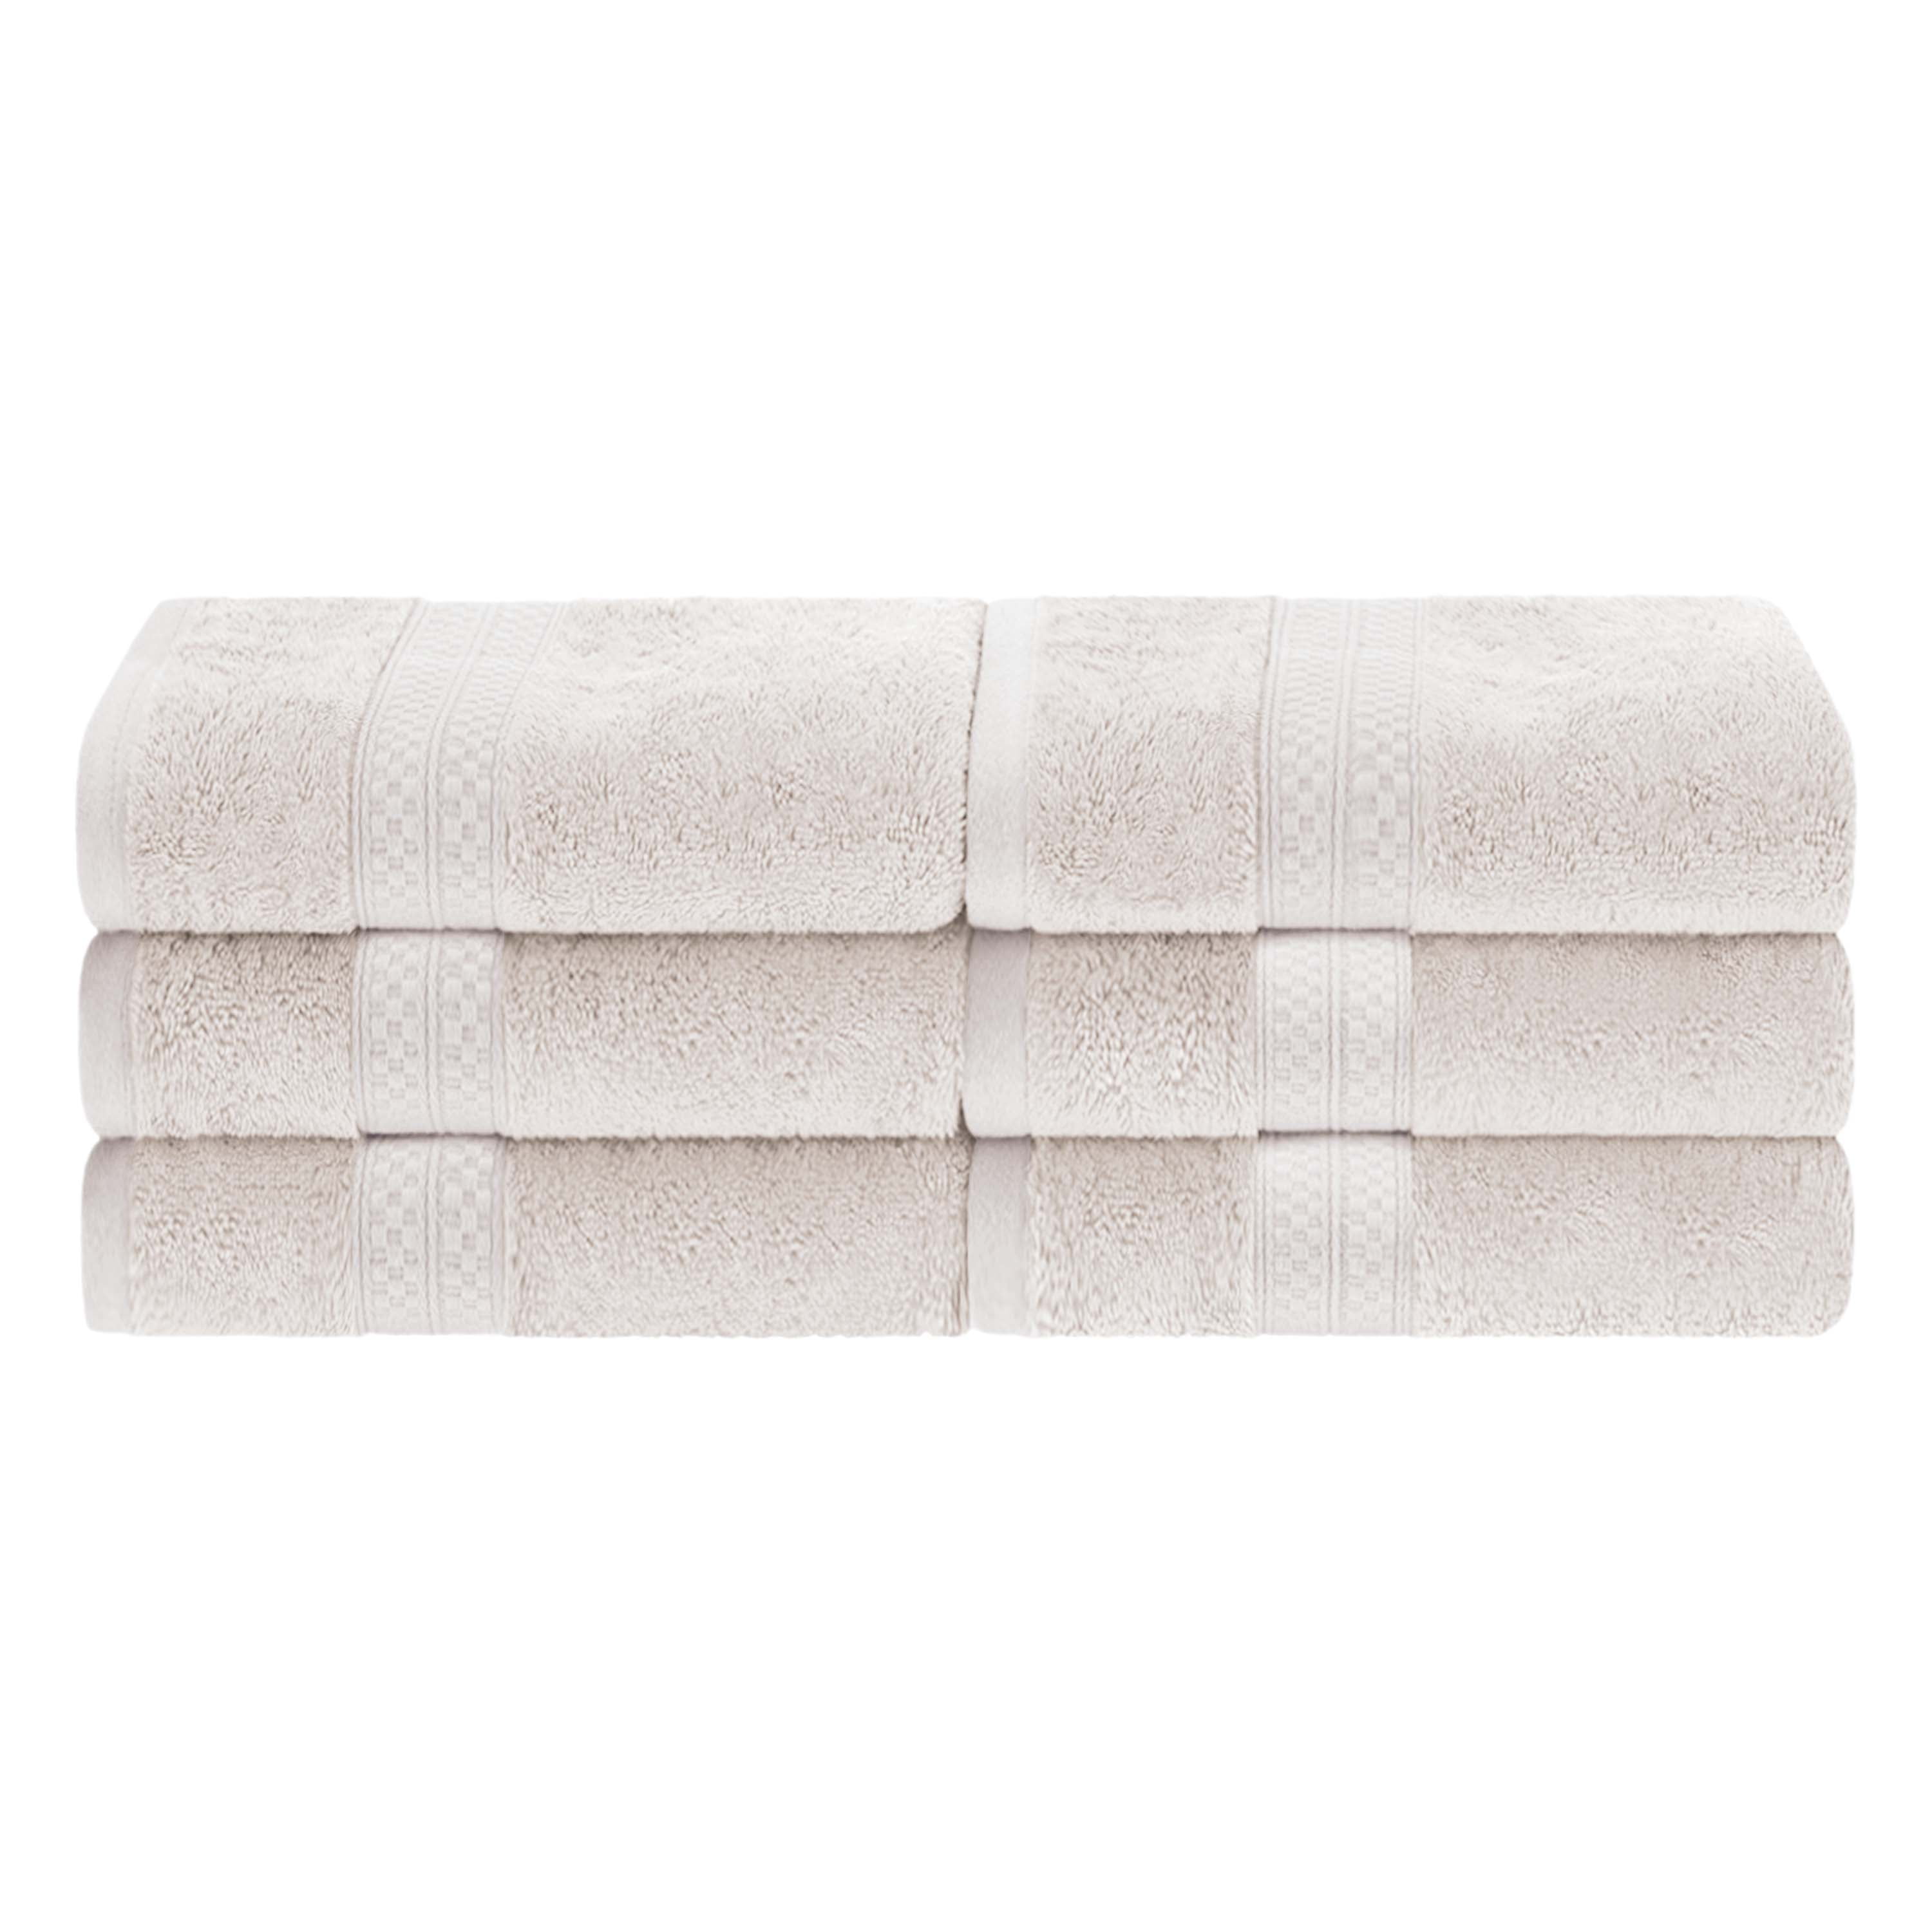 Bamboo Rayon/Cotton Soft Plush & Absorbent Towels 650 GSM Hand Towel Set of 6 